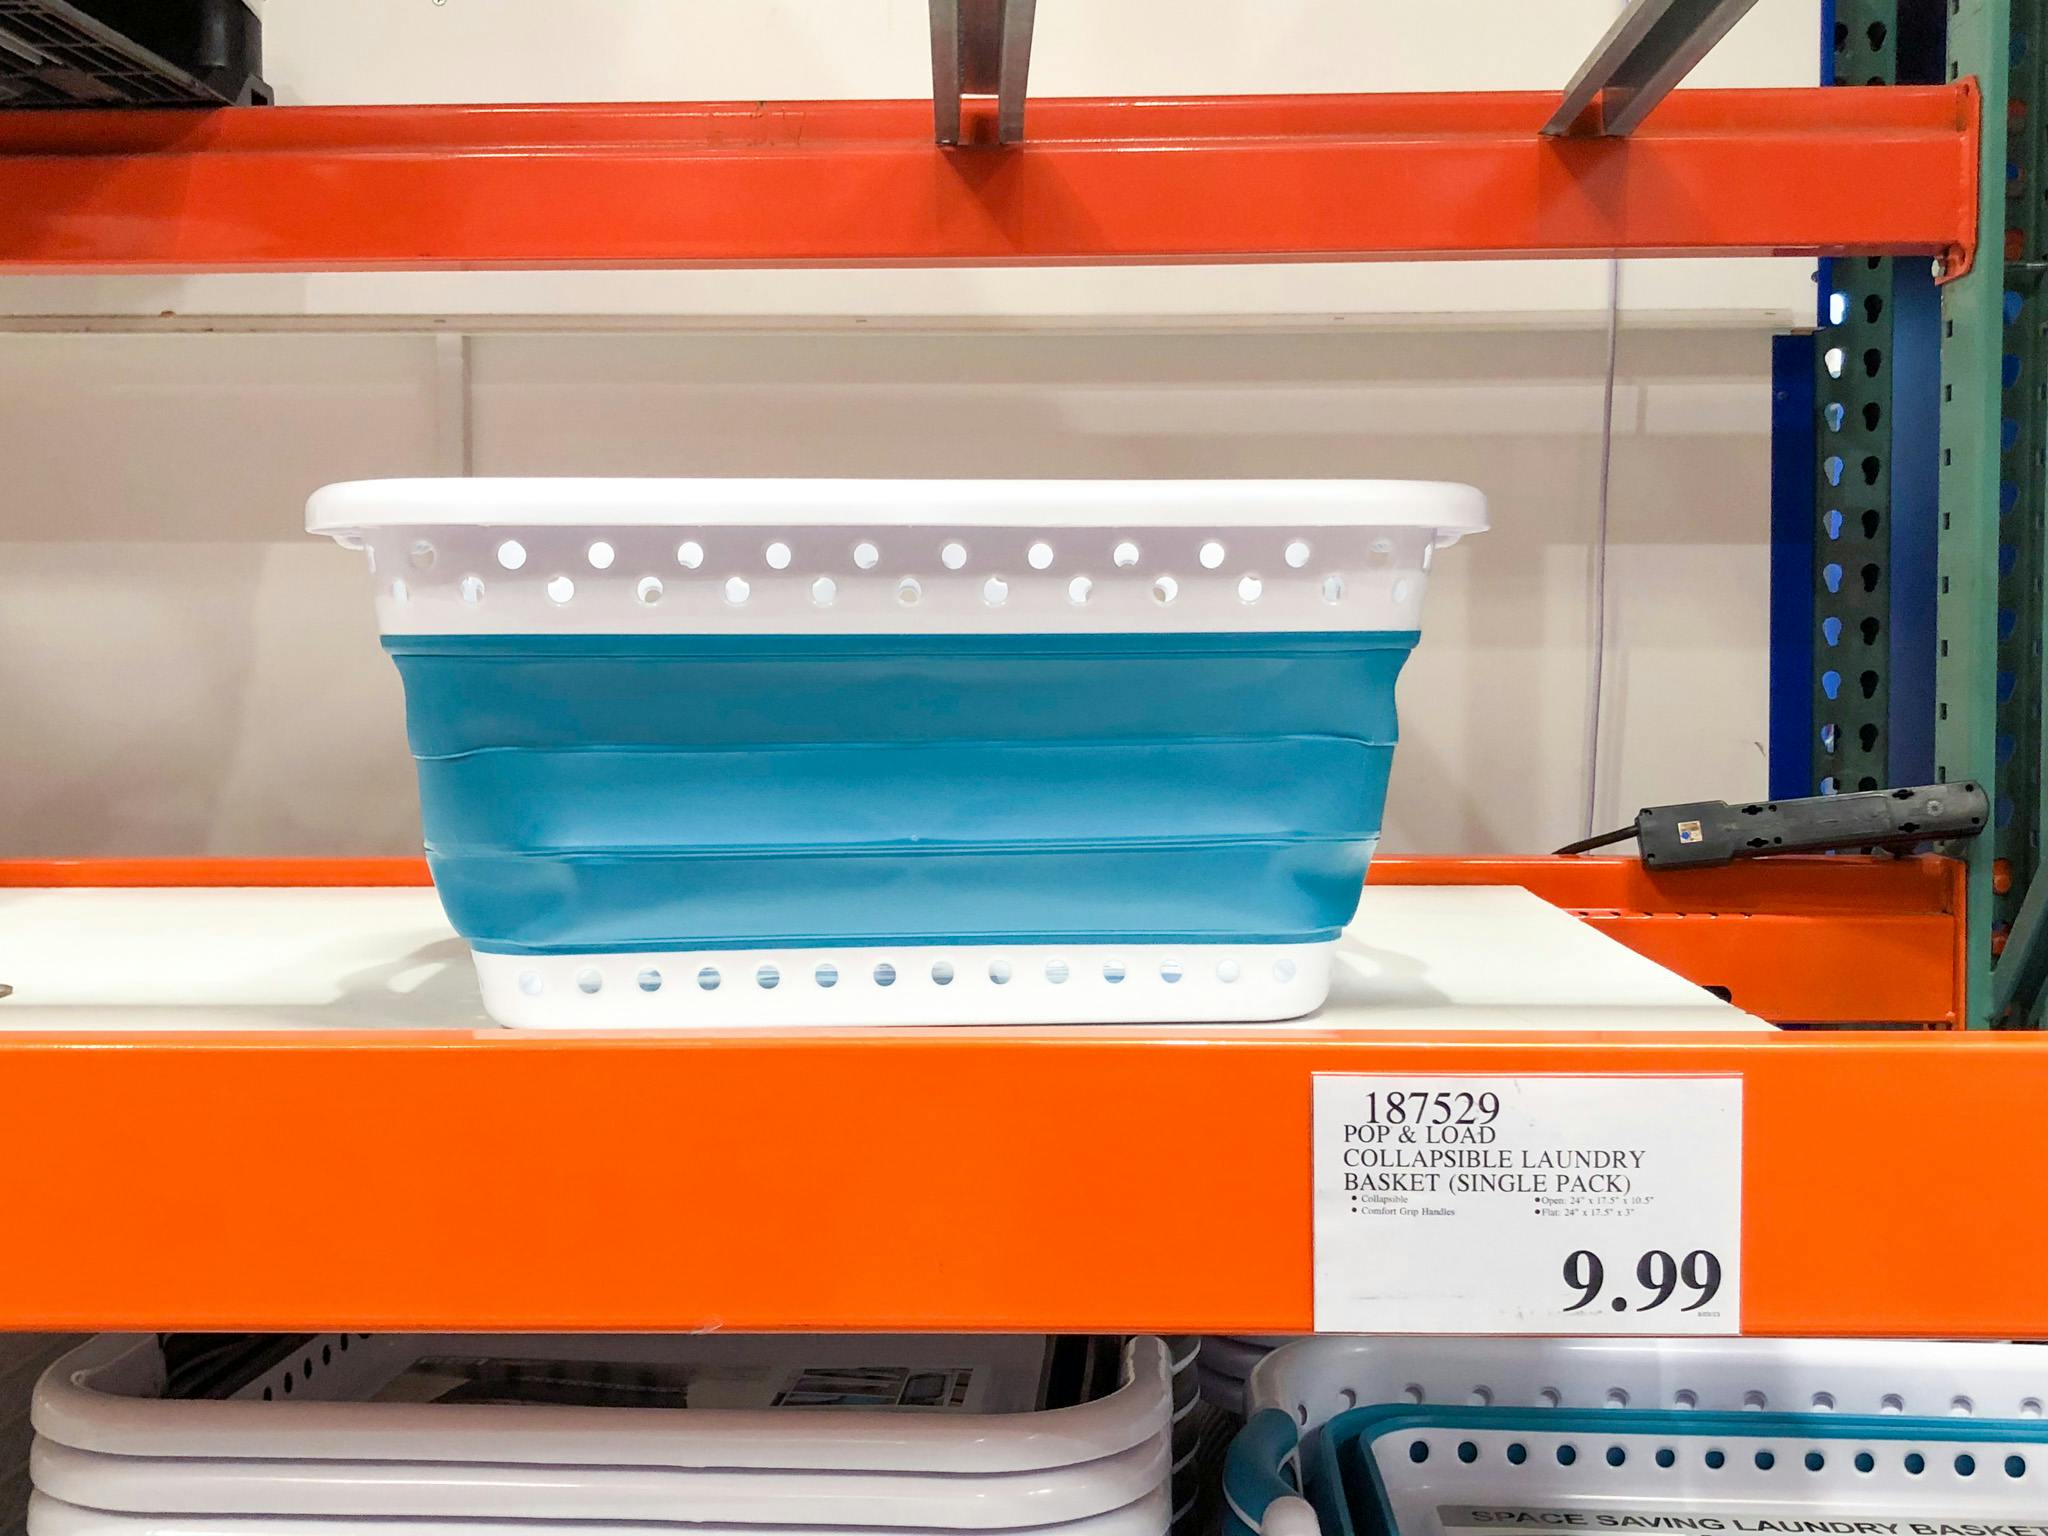 Costco Deals on X: 🙌Pop and load #collapsible #laundrybasket now